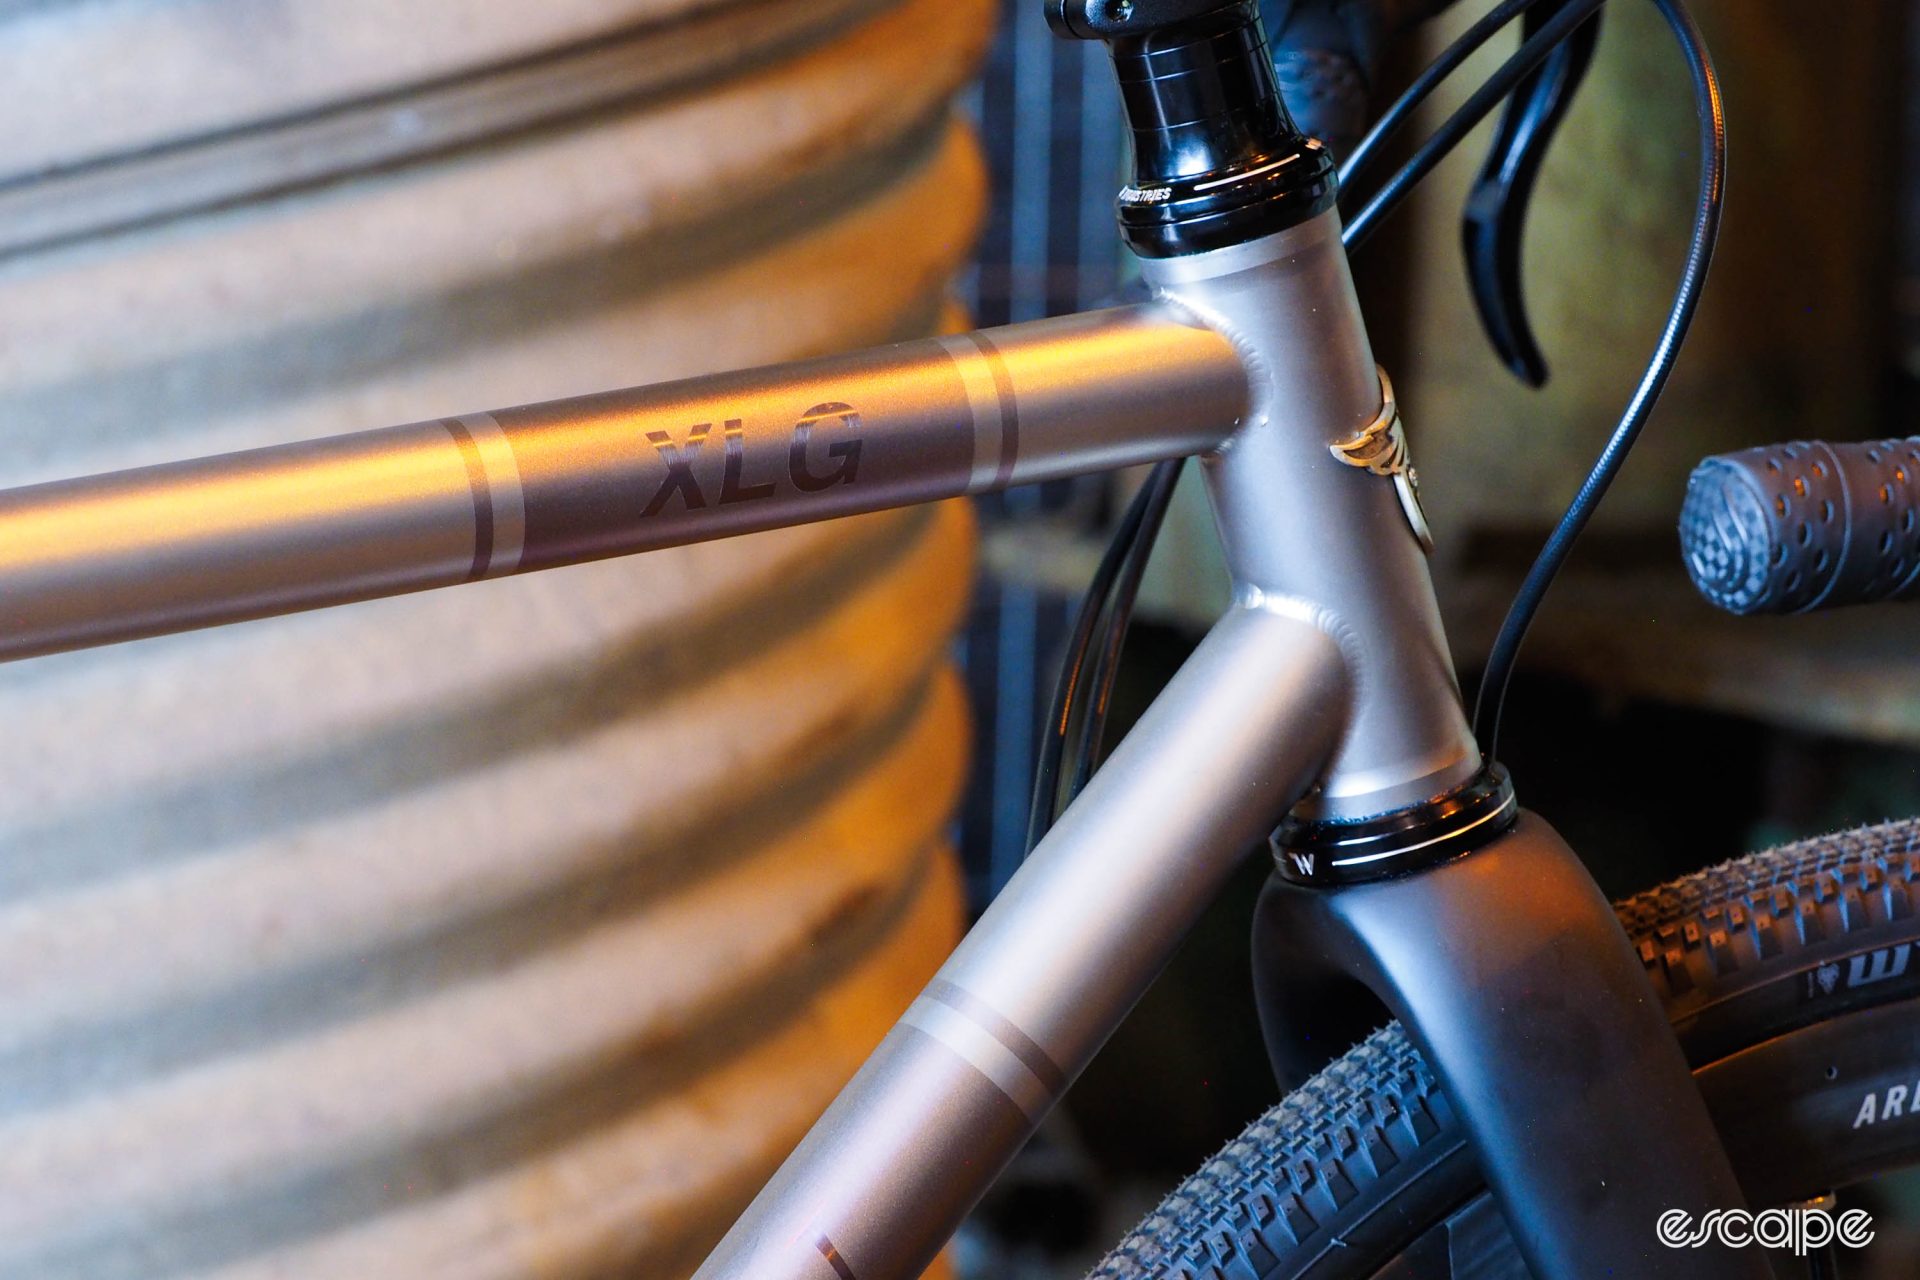 Merlin Sandstone XLG externally butted head tube.